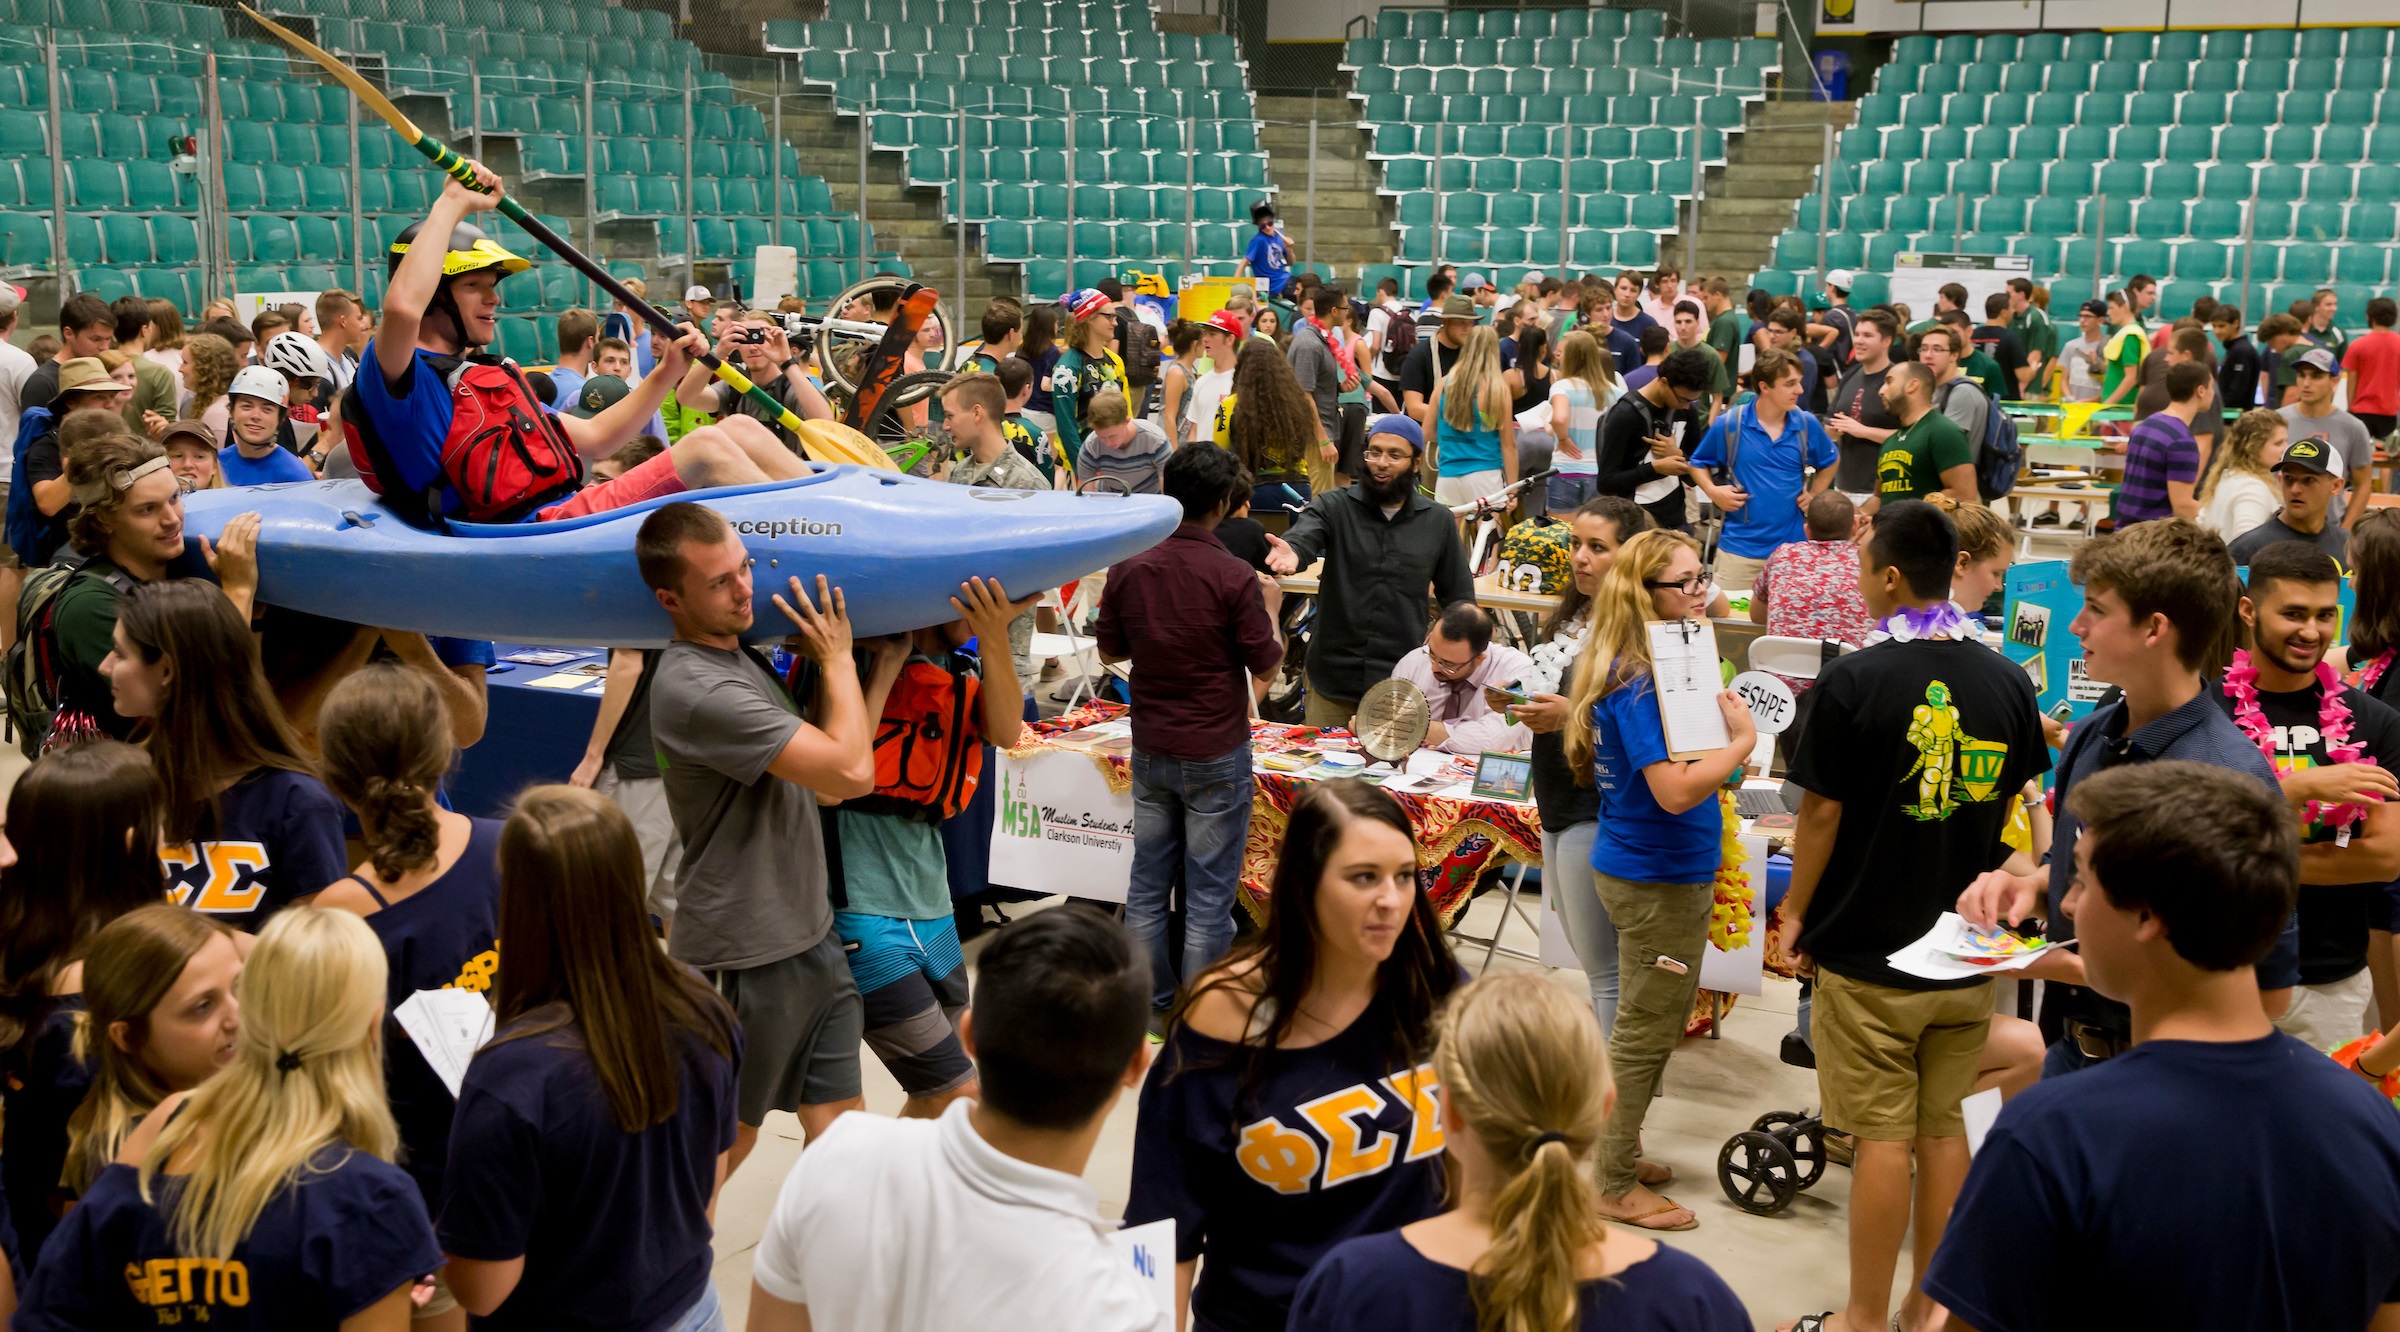 Several students carry another student in a kayak through a crowd of dozens of students at the Student Activities Fair.